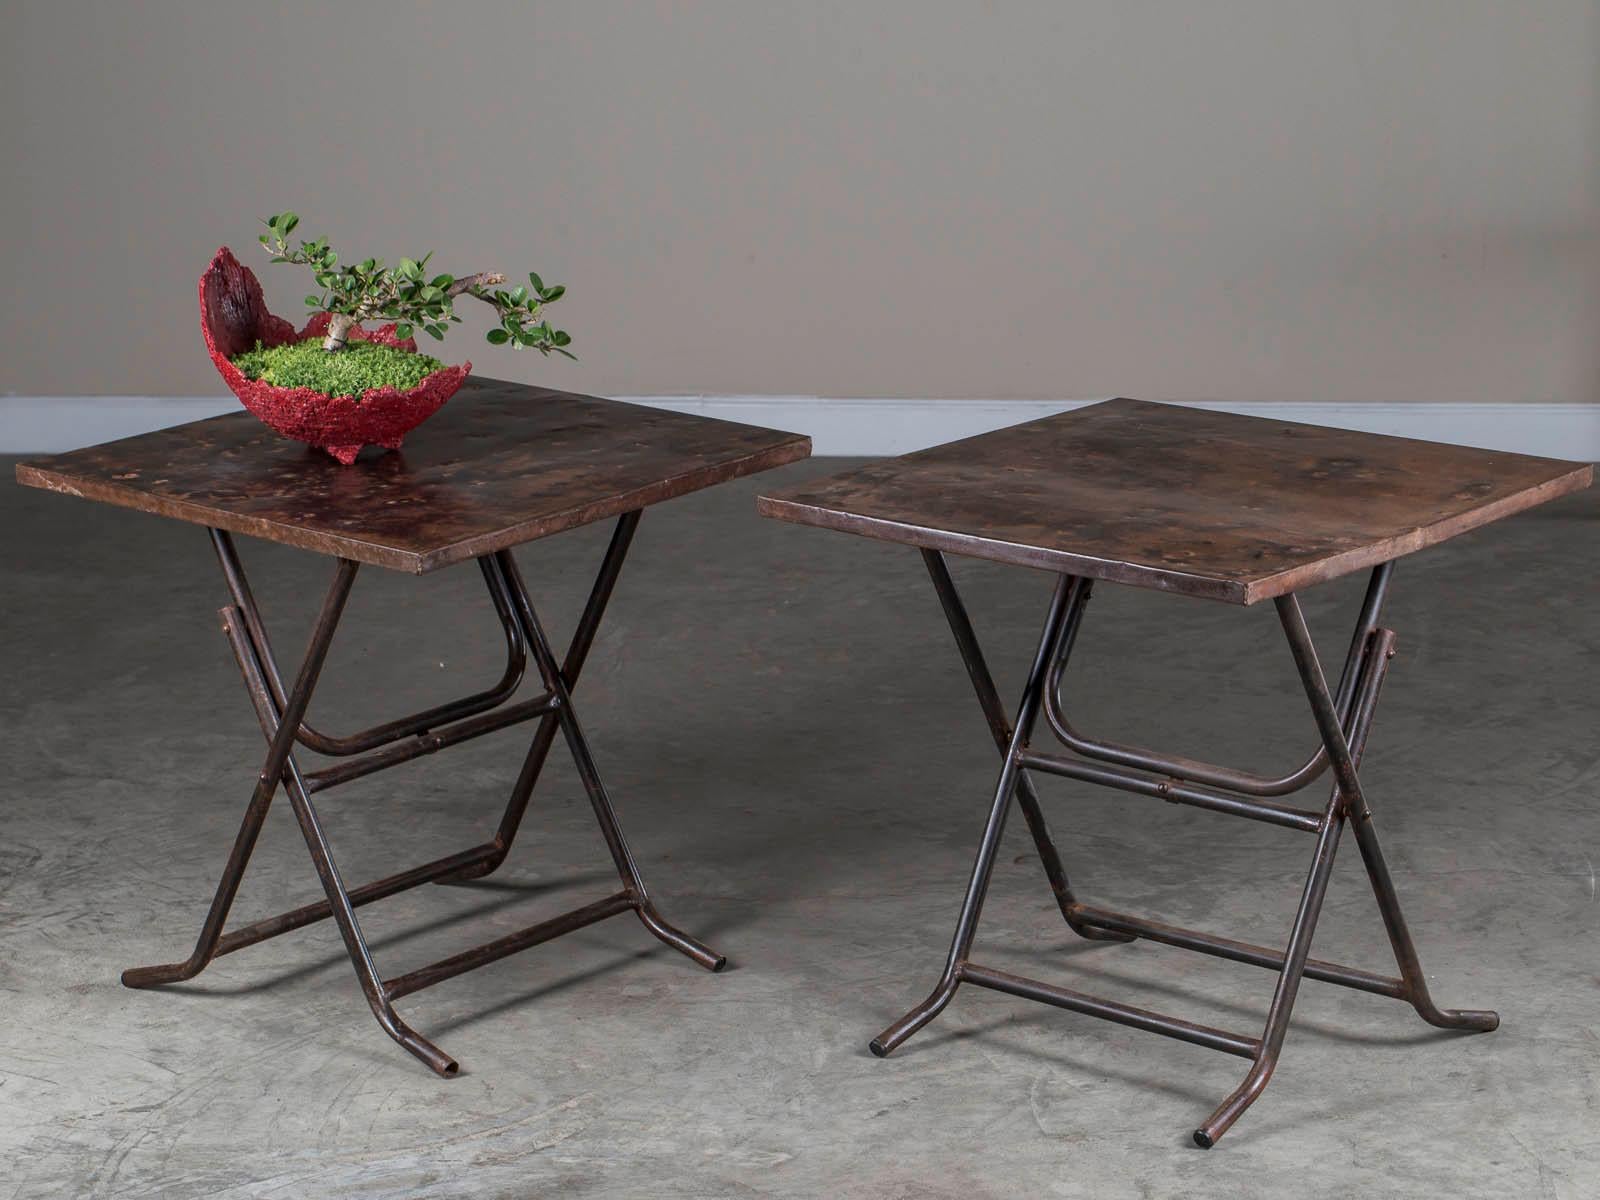 A super functional and good looking pair of square metal folding tables with folded edges and tubular legs found in Asia. The scale of these tables are perfect for bedside or sofa as they easily accommodate a lamp and objects across their surface.